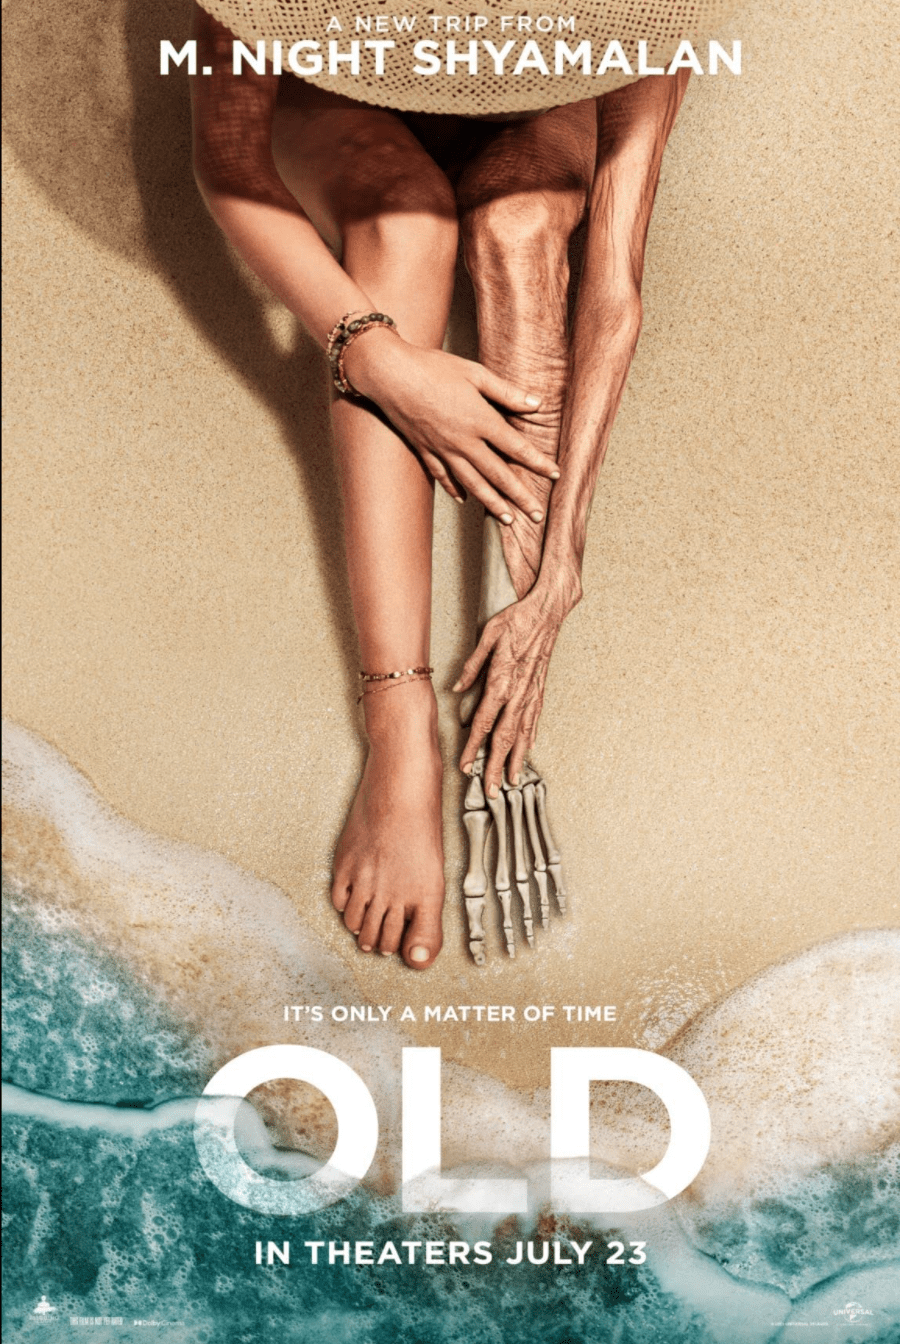 The poster for "Old" shows a woman sitting on a beach as her leg becomes just bone, a sign of her rapid aging. This kind of supernatural plot is typical for director Shyamalan, who rose to prominence with his 1999 hit, "The Sixth Sense," and is known for his film&squot;s plot twists and suspenseful tones. Photo Courtesy of Universal Studios